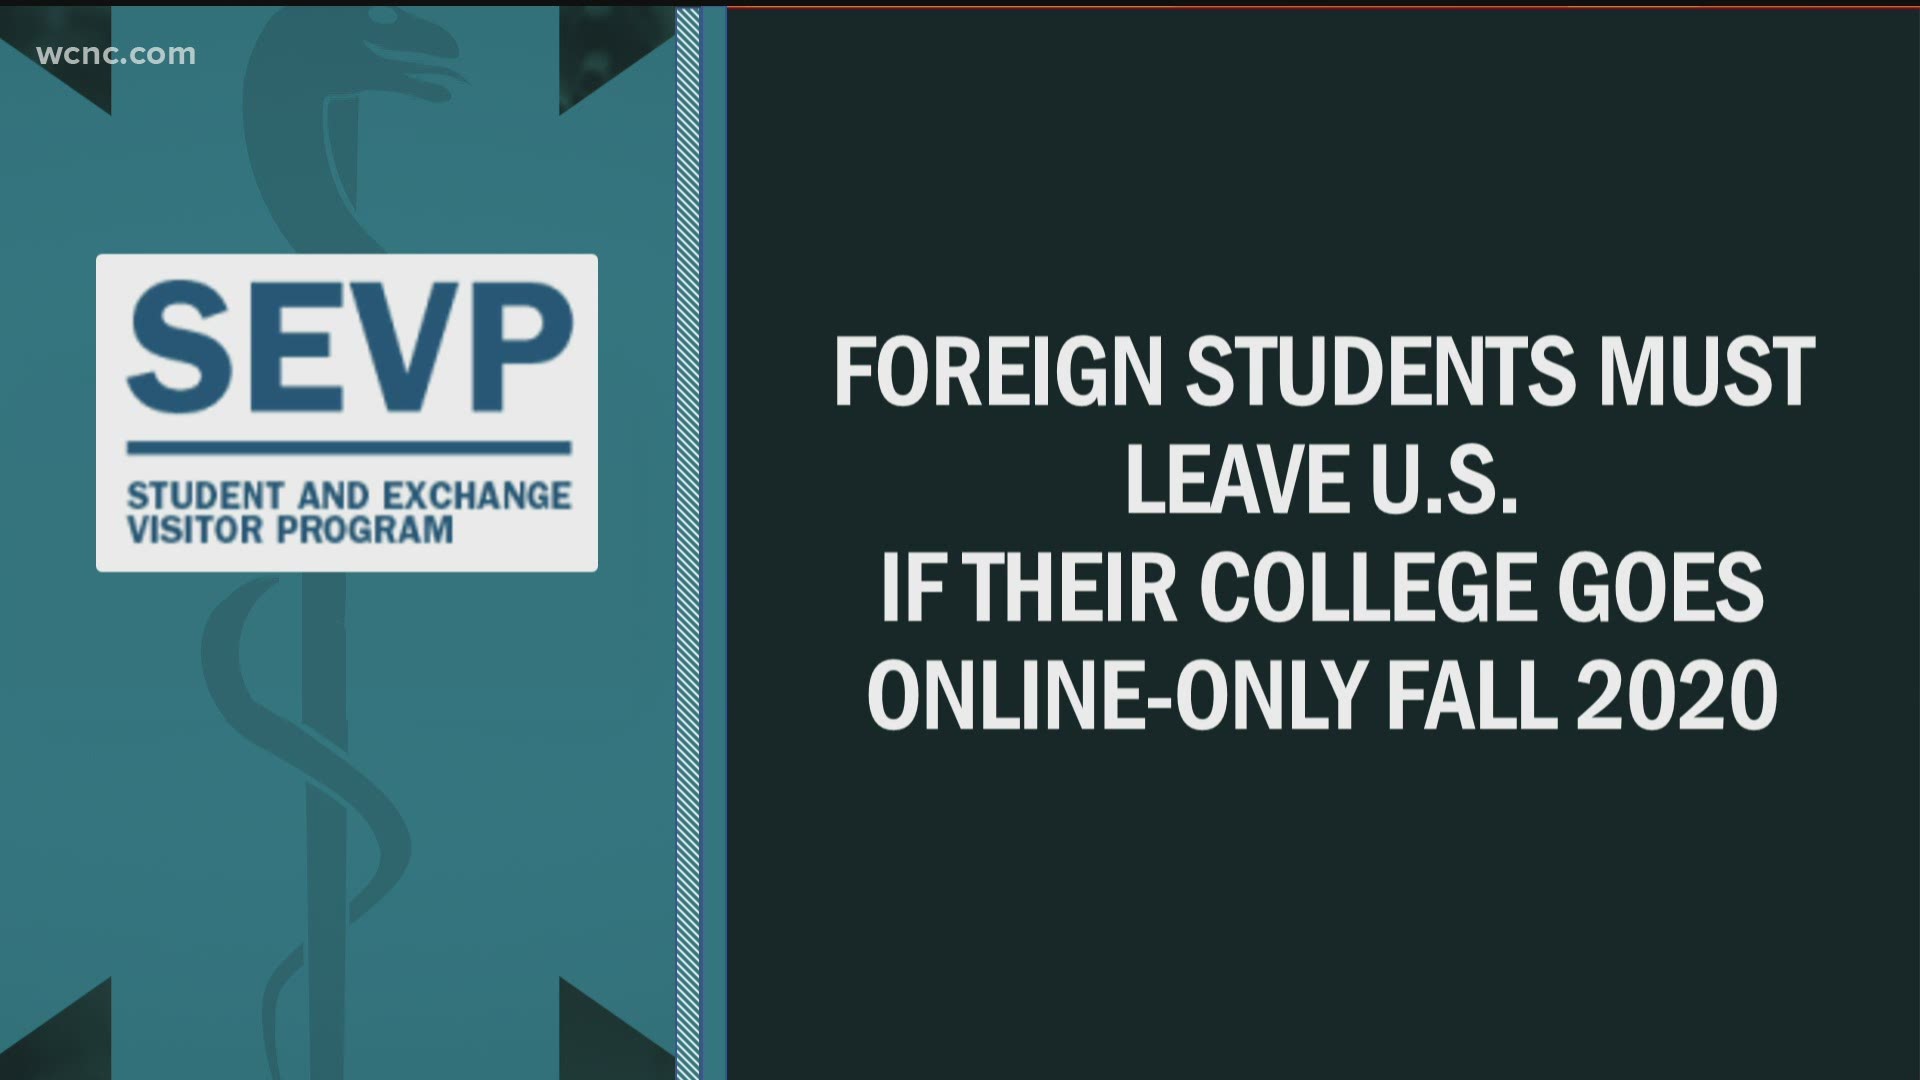 The news release states that non-immigrant students in the U.S. on student visas will not be allowed to stay in the country if their school turns to virtual learning